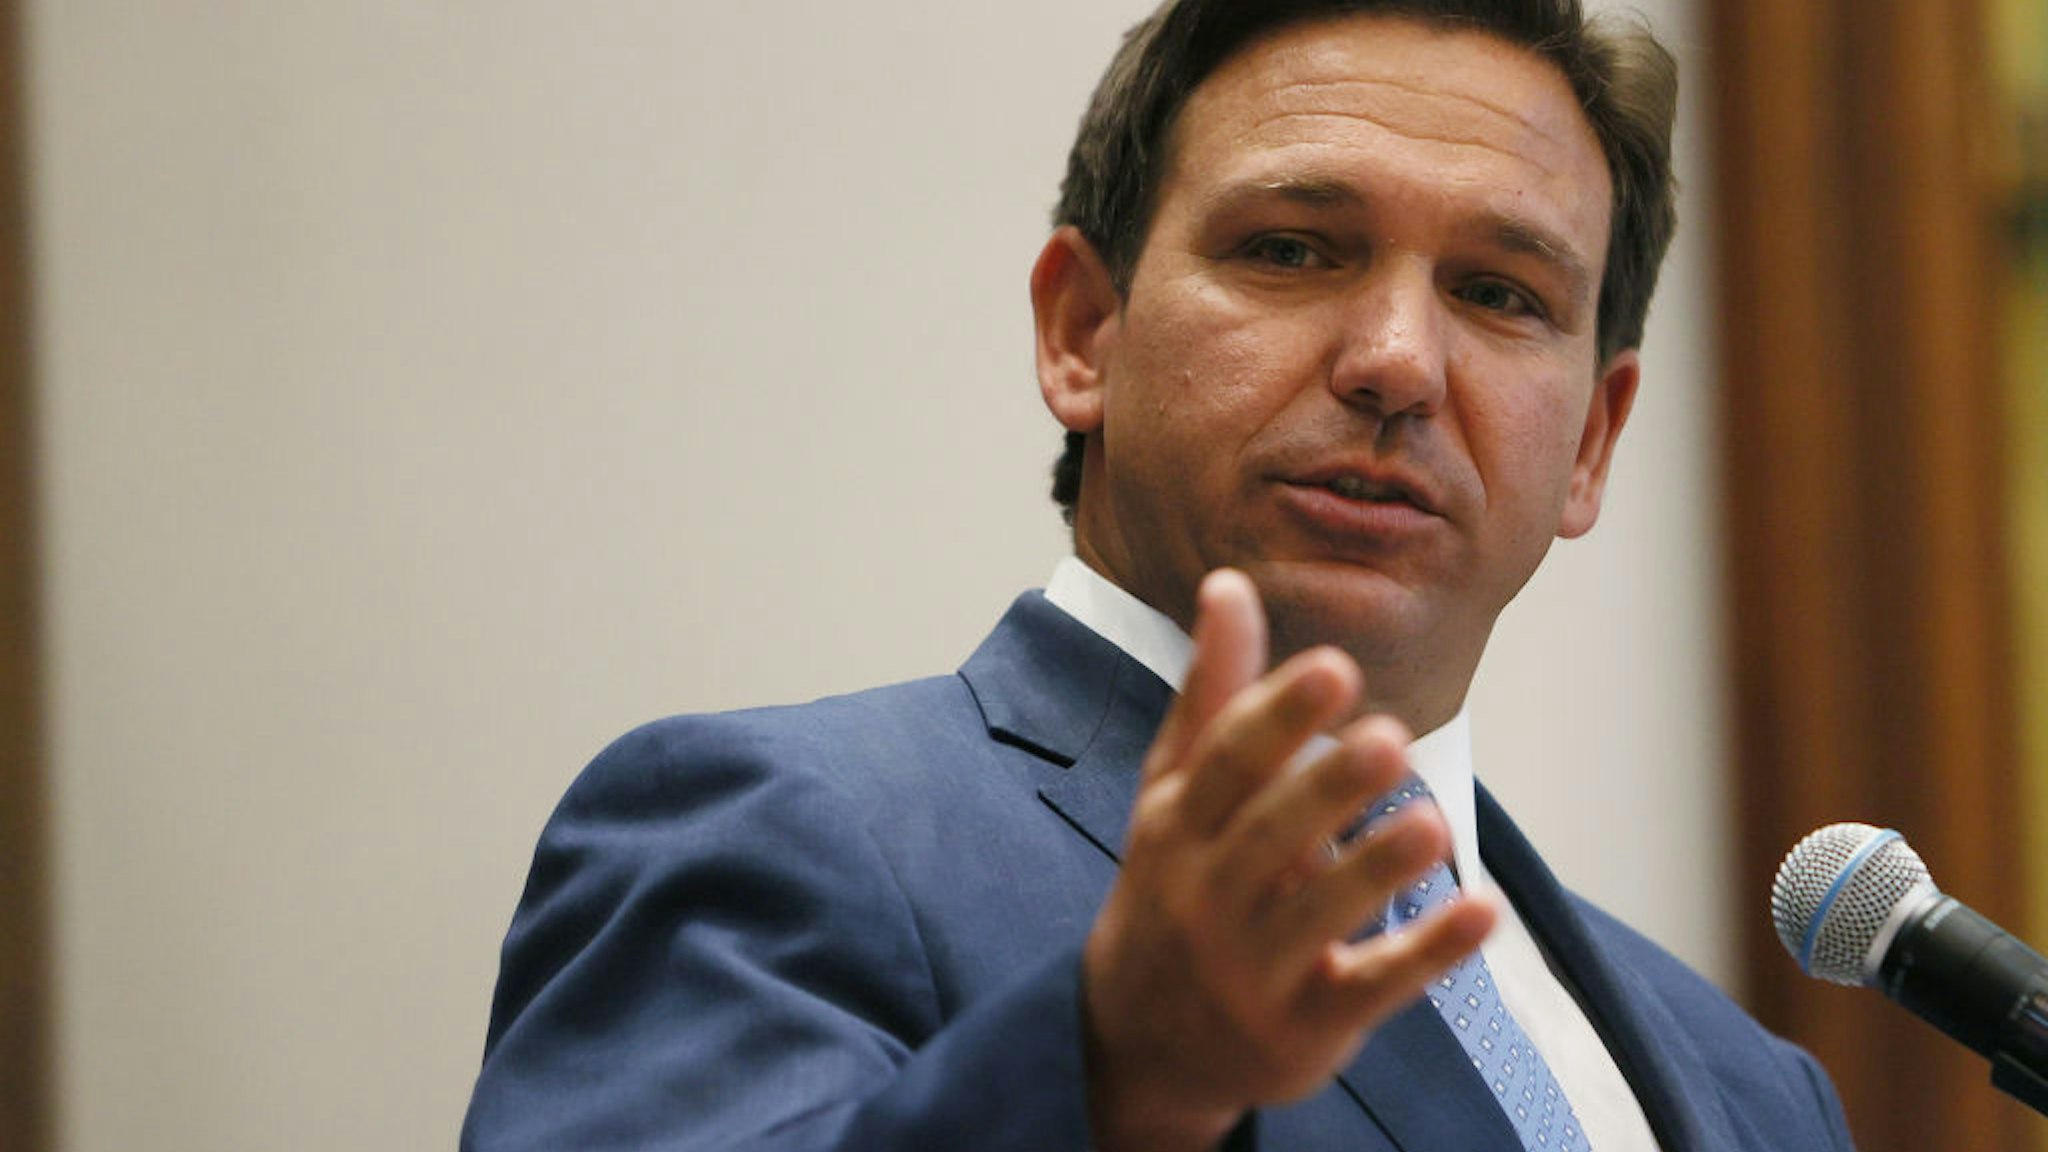 SURFSIDE, FLORIDA - JUNE 14: Florida Gov. Ron DeSantis speaks during a press conference at the Shul of Bal Harbour on June 14, 2021 in Surfside, Florida. The governor spoke about the two bills he signed HB 529 and HB 805. HB 805 ensures that volunteer ambulance services, including Hatzalah, can operate. HB 529 requires Florida schools to hold a daily moment of silence.